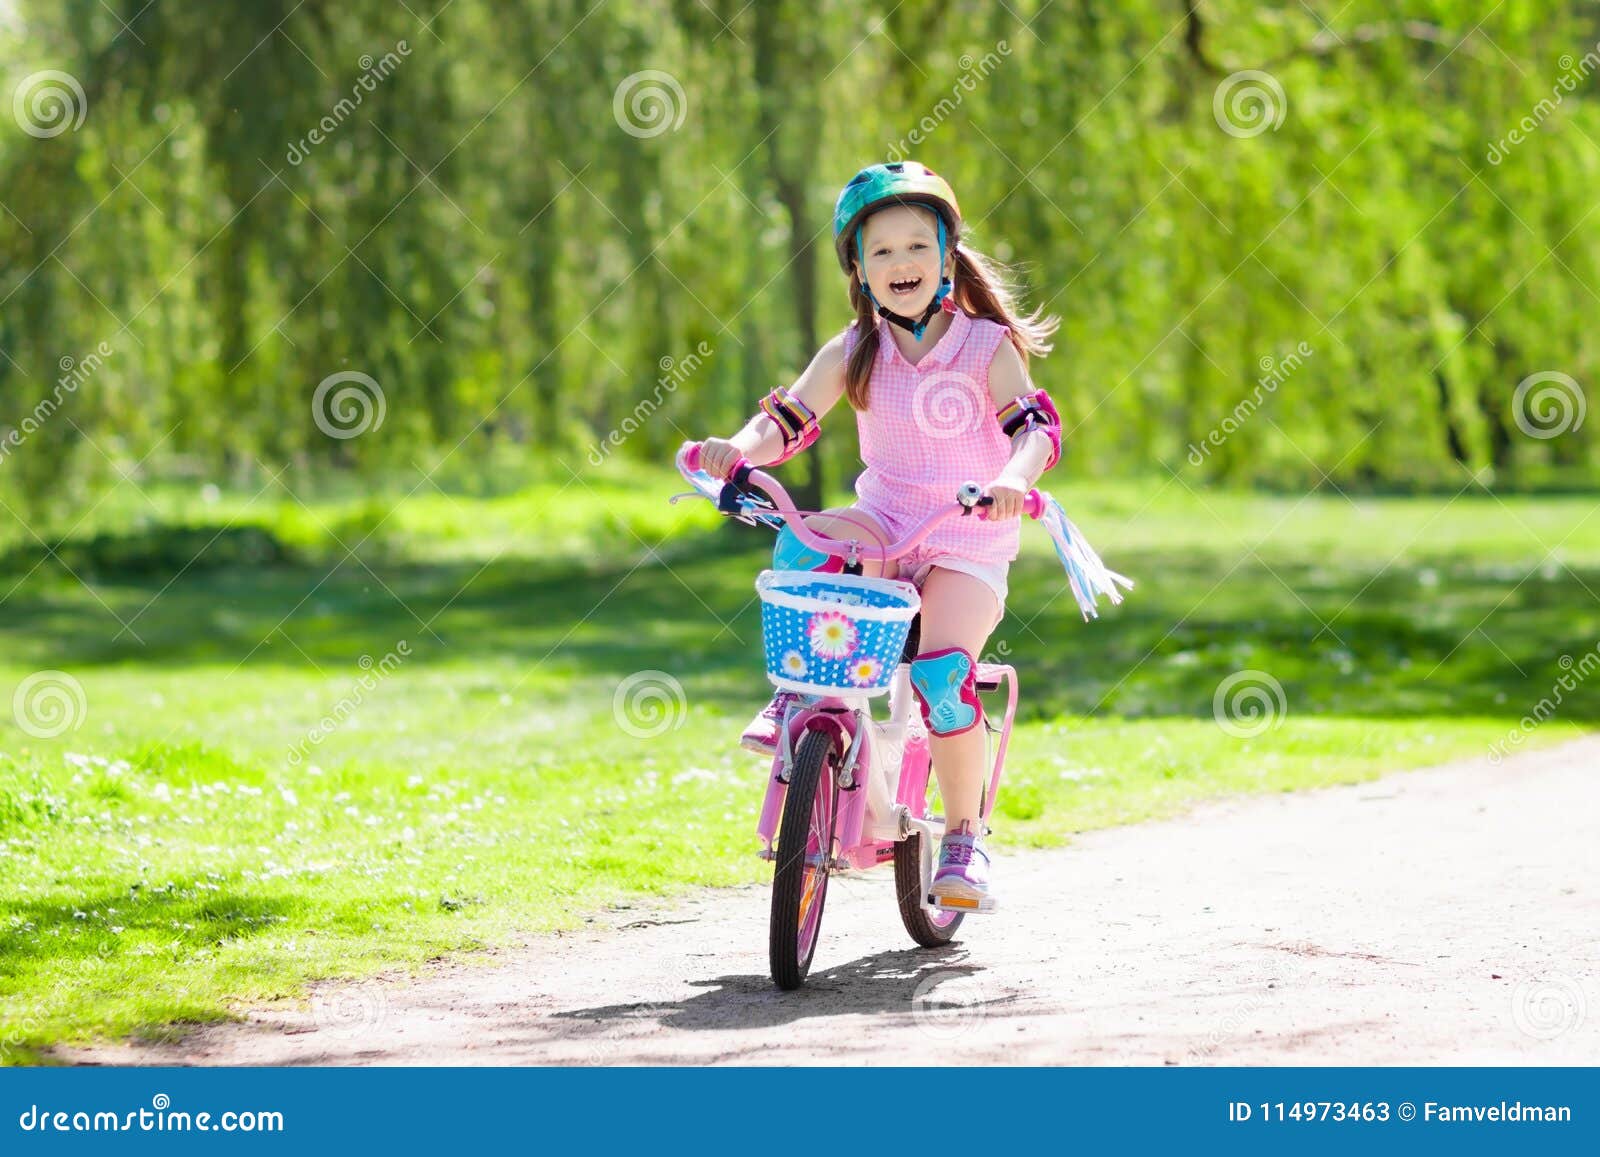 how to help a child ride a bike